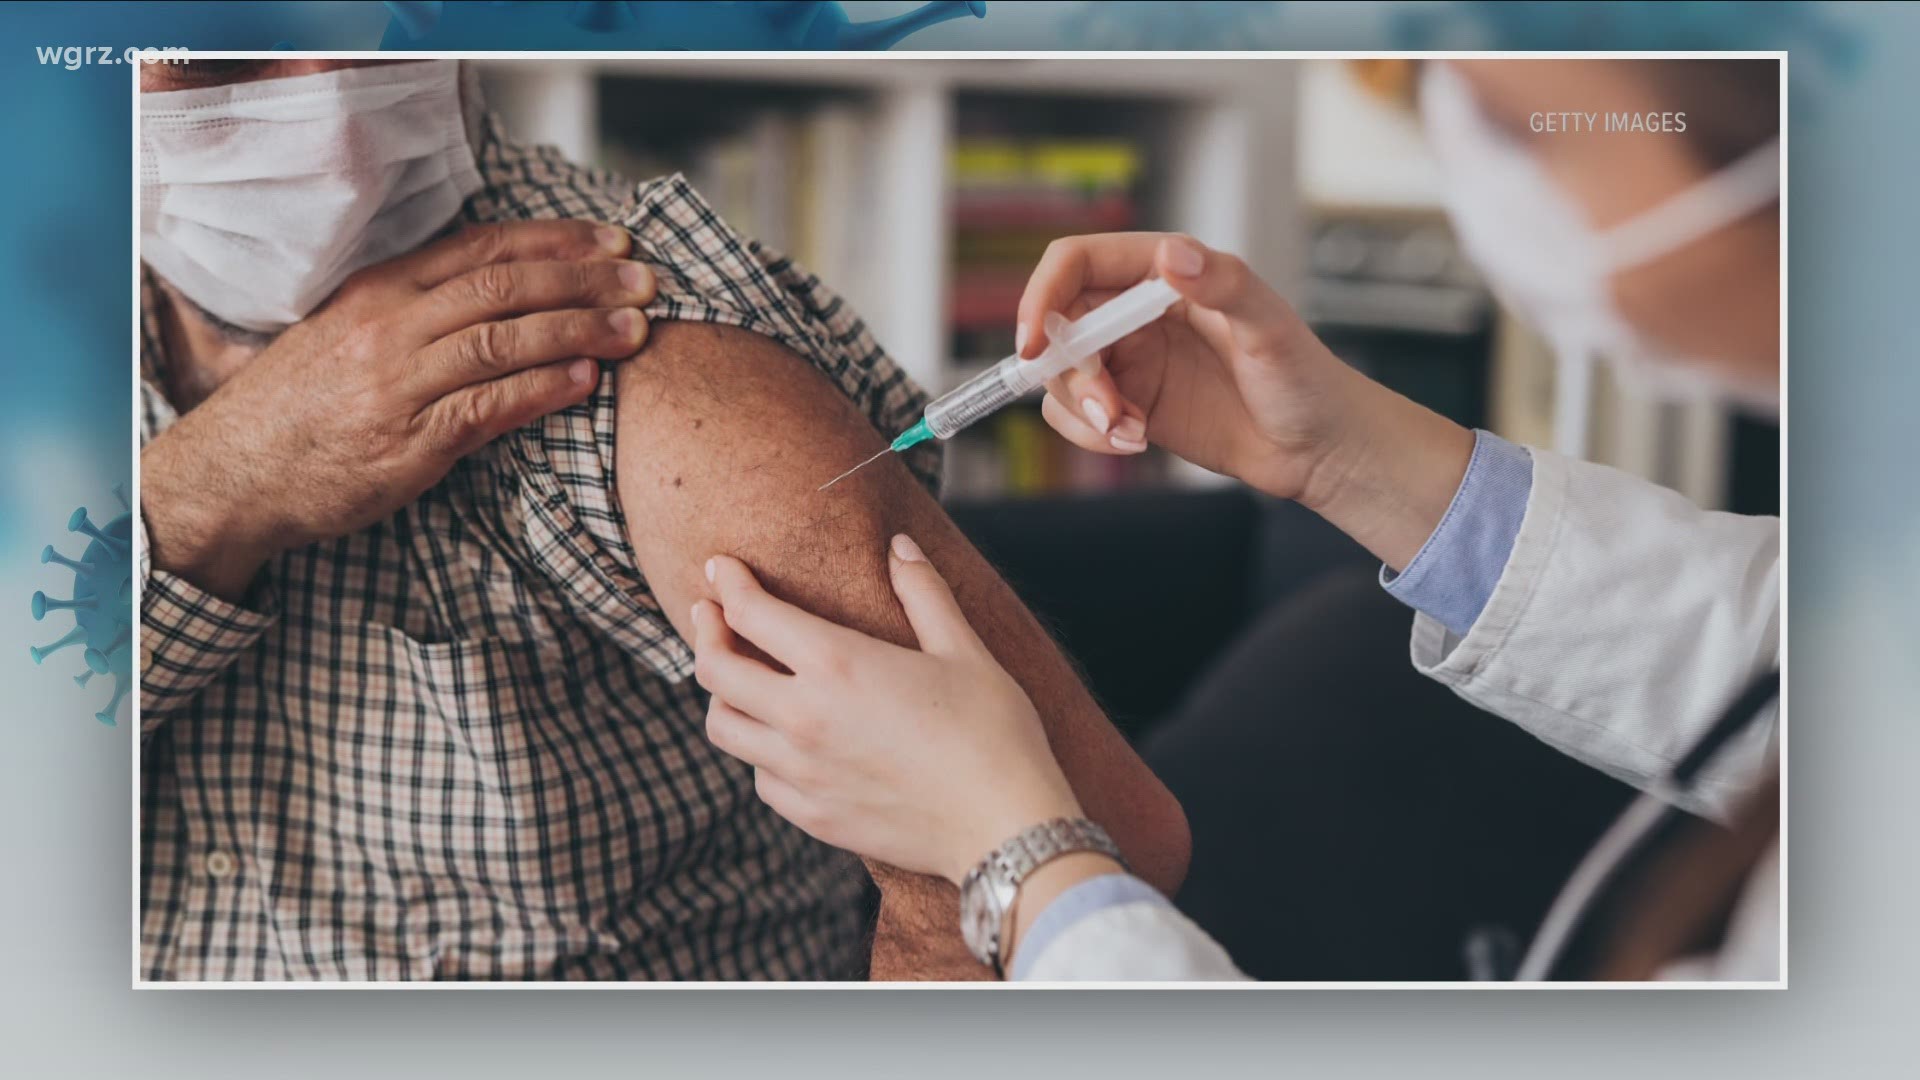 If you were scheduled to get your Covid vaccine next Monday, Tuesday and Wednesday through the Erie County Health Department, those appointments have been canceled.